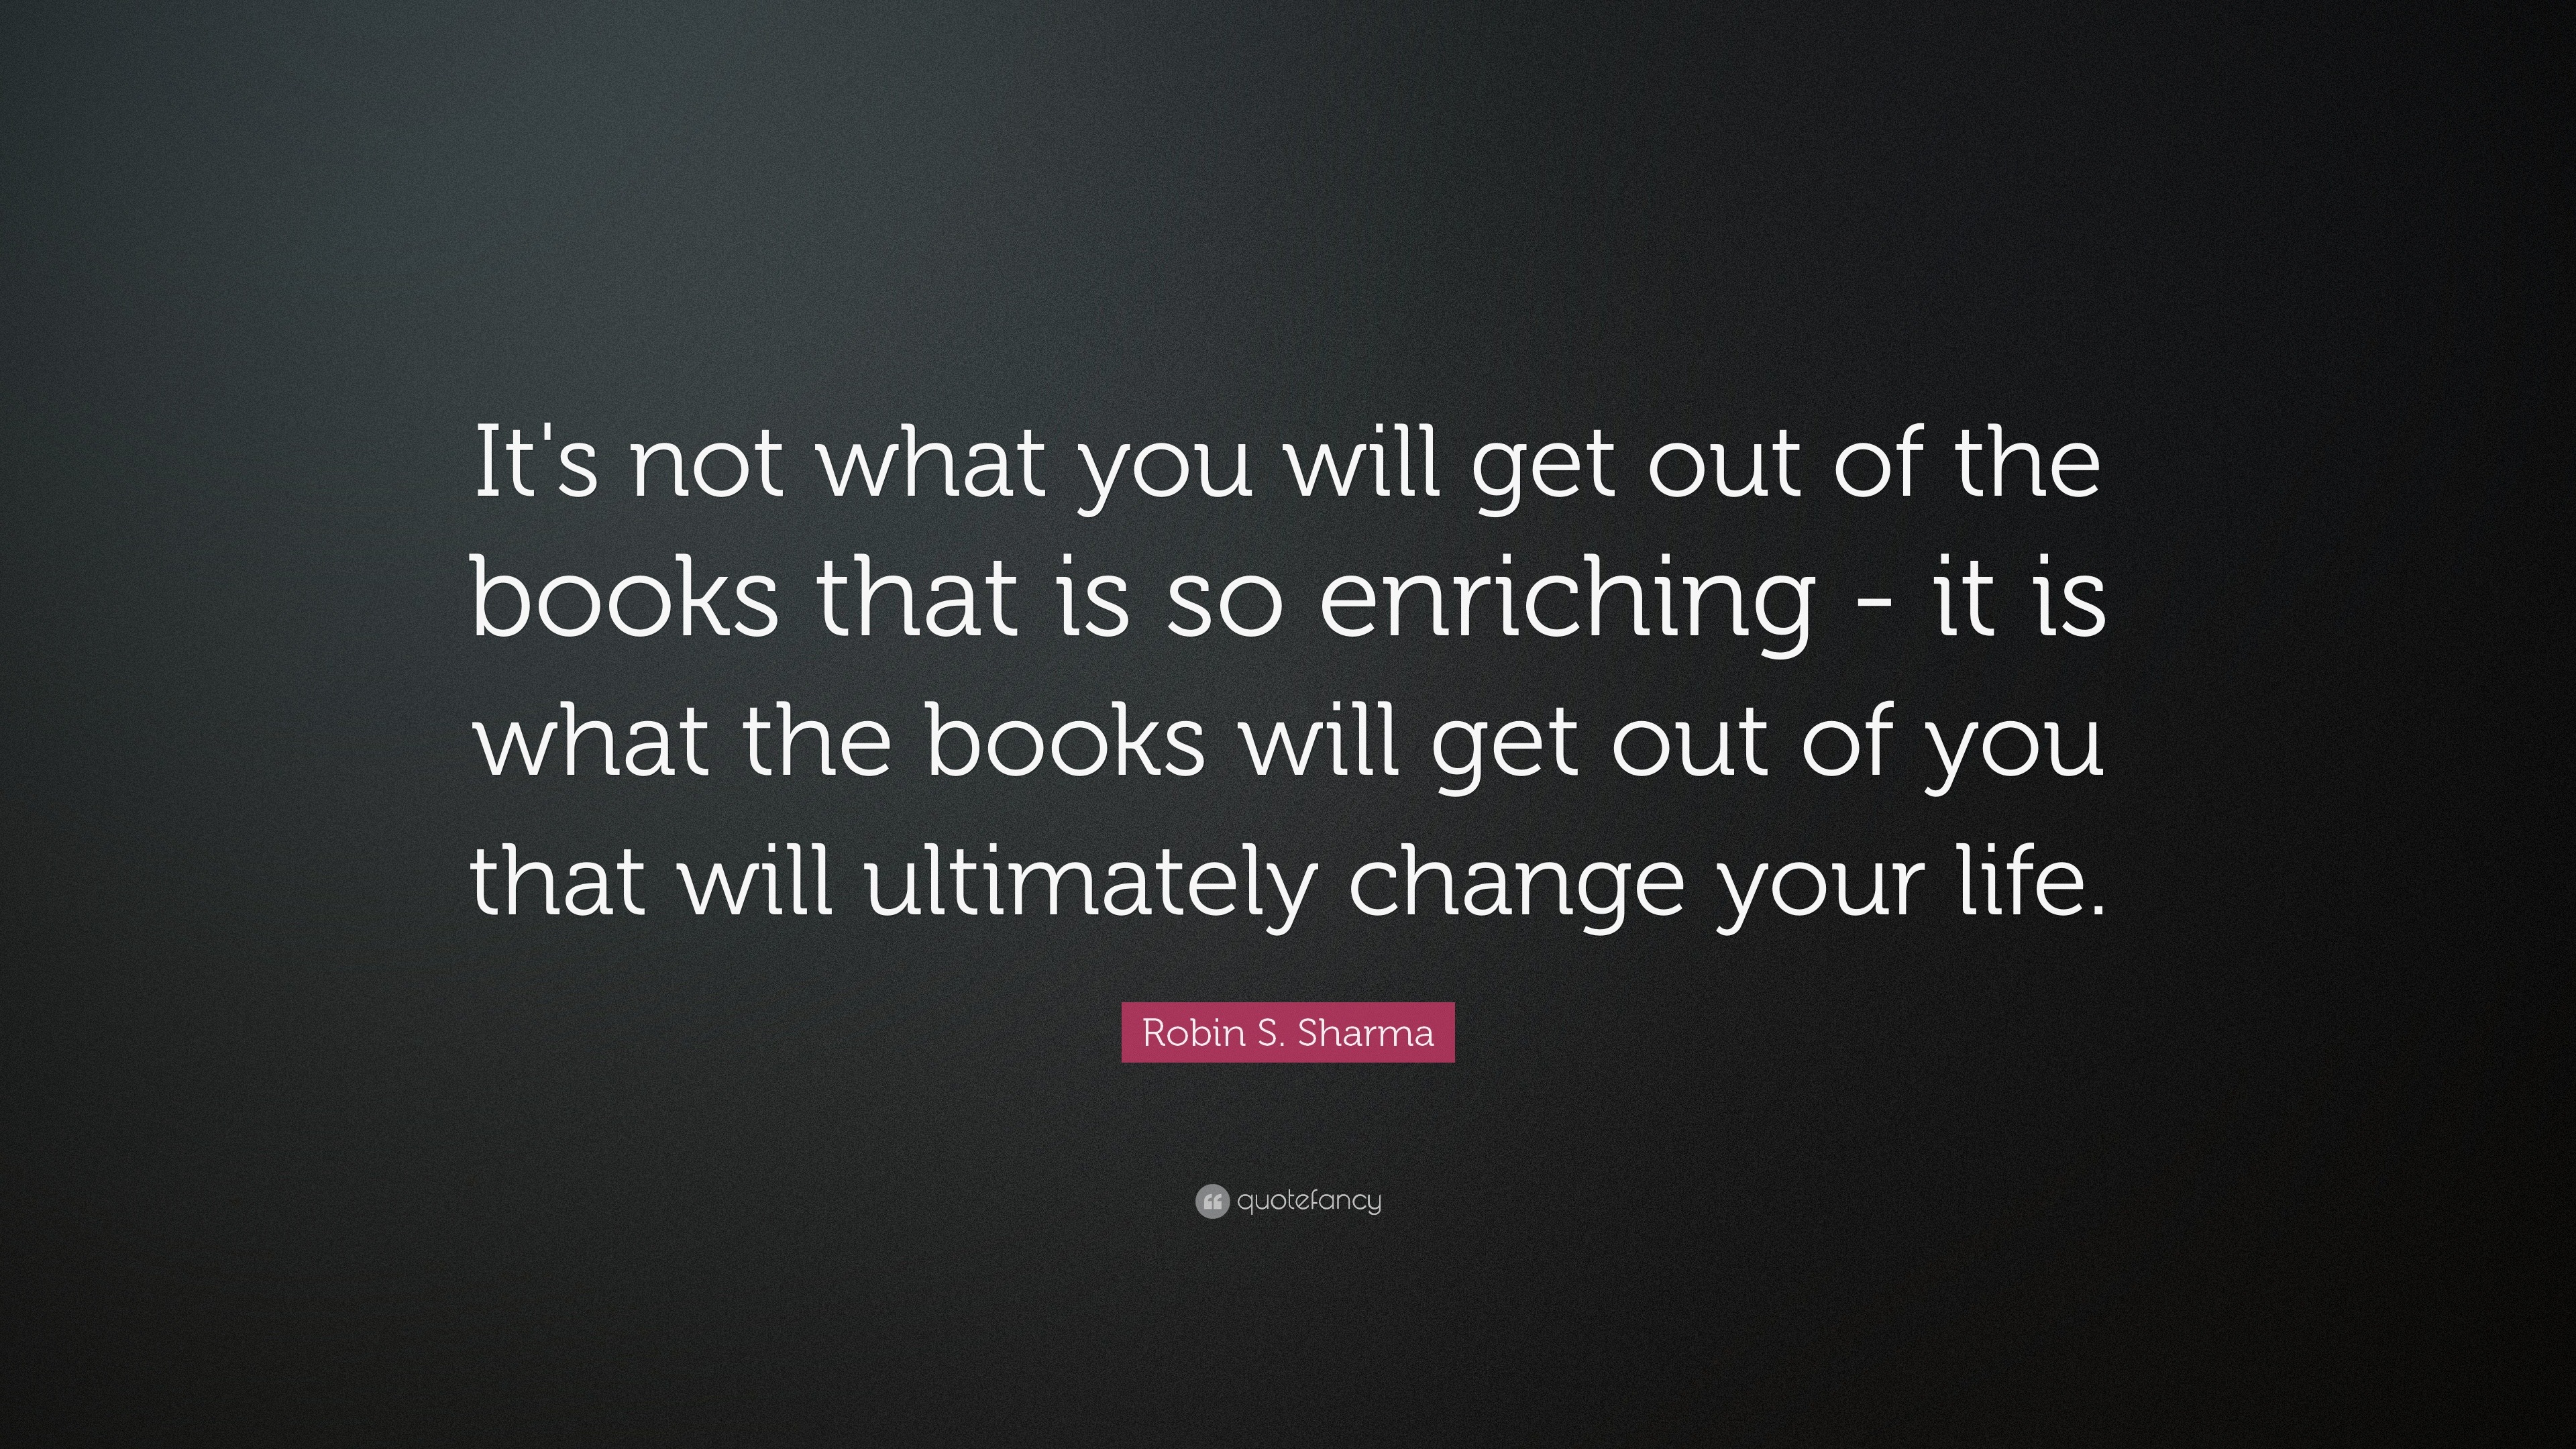 Robin S. Sharma Quote: “It's not what you will get out of the books ...